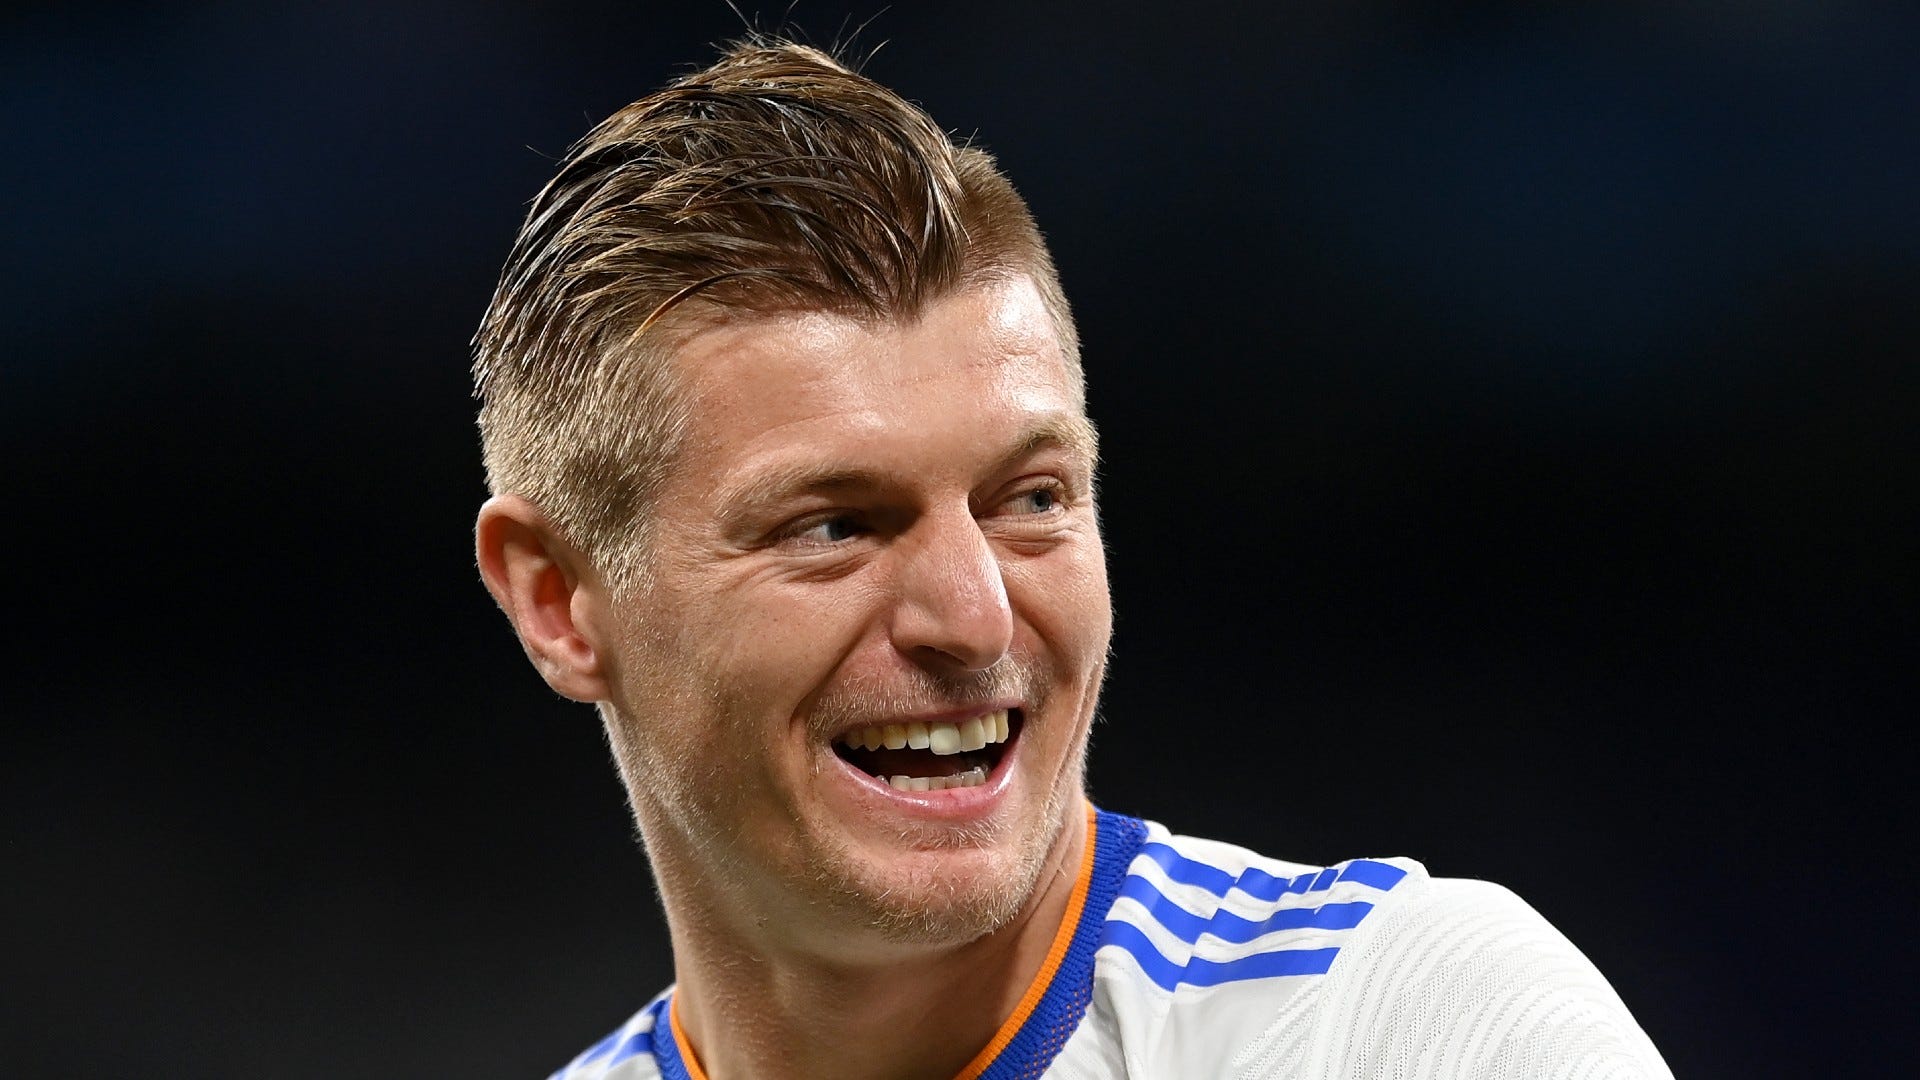 Toni Kroos Pictures and Photos | Toni kroos, Bearded men hot, Real madrid  players